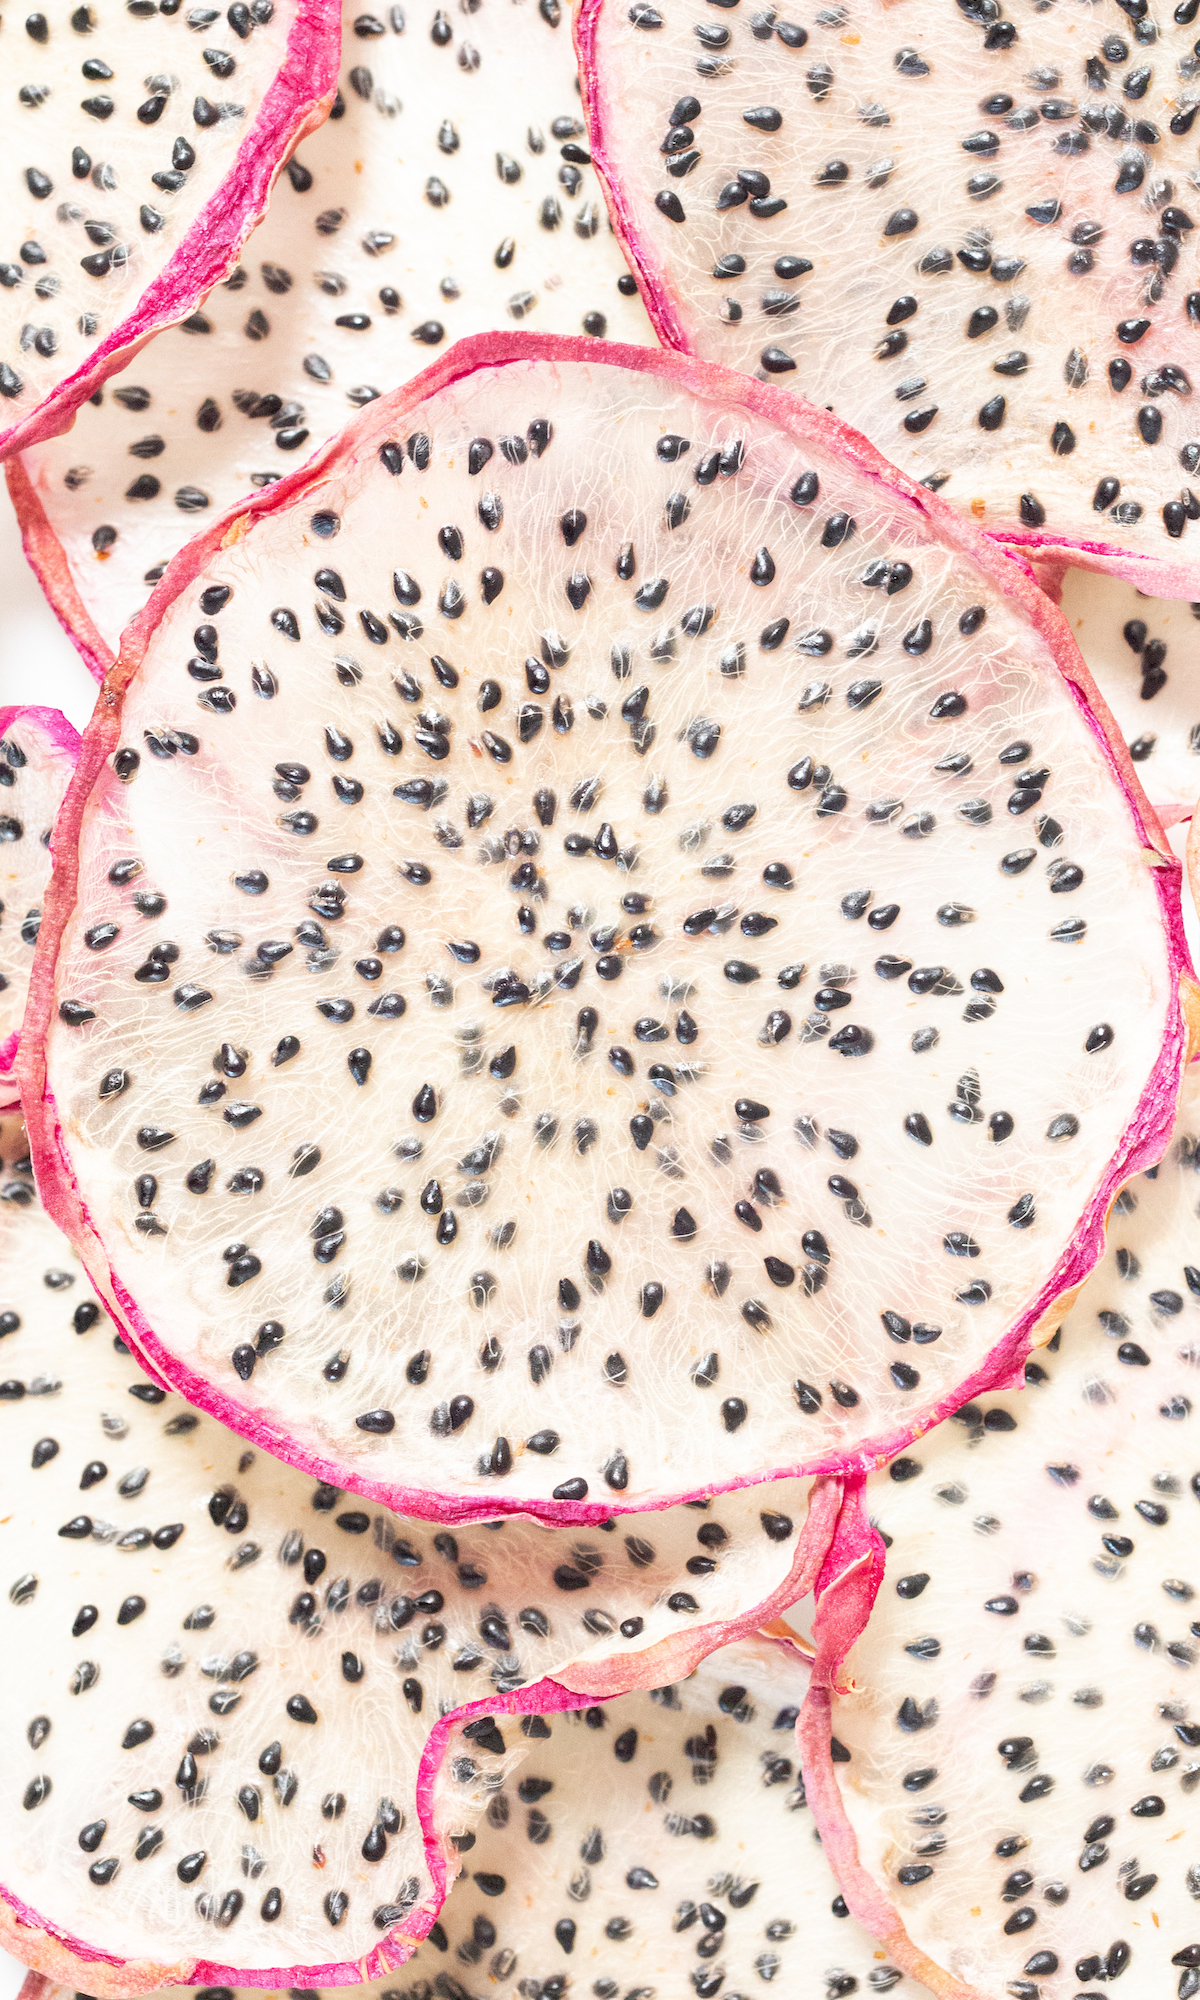 Close up of dehydrated slices of dragonfruit with pink peels and white flesh.